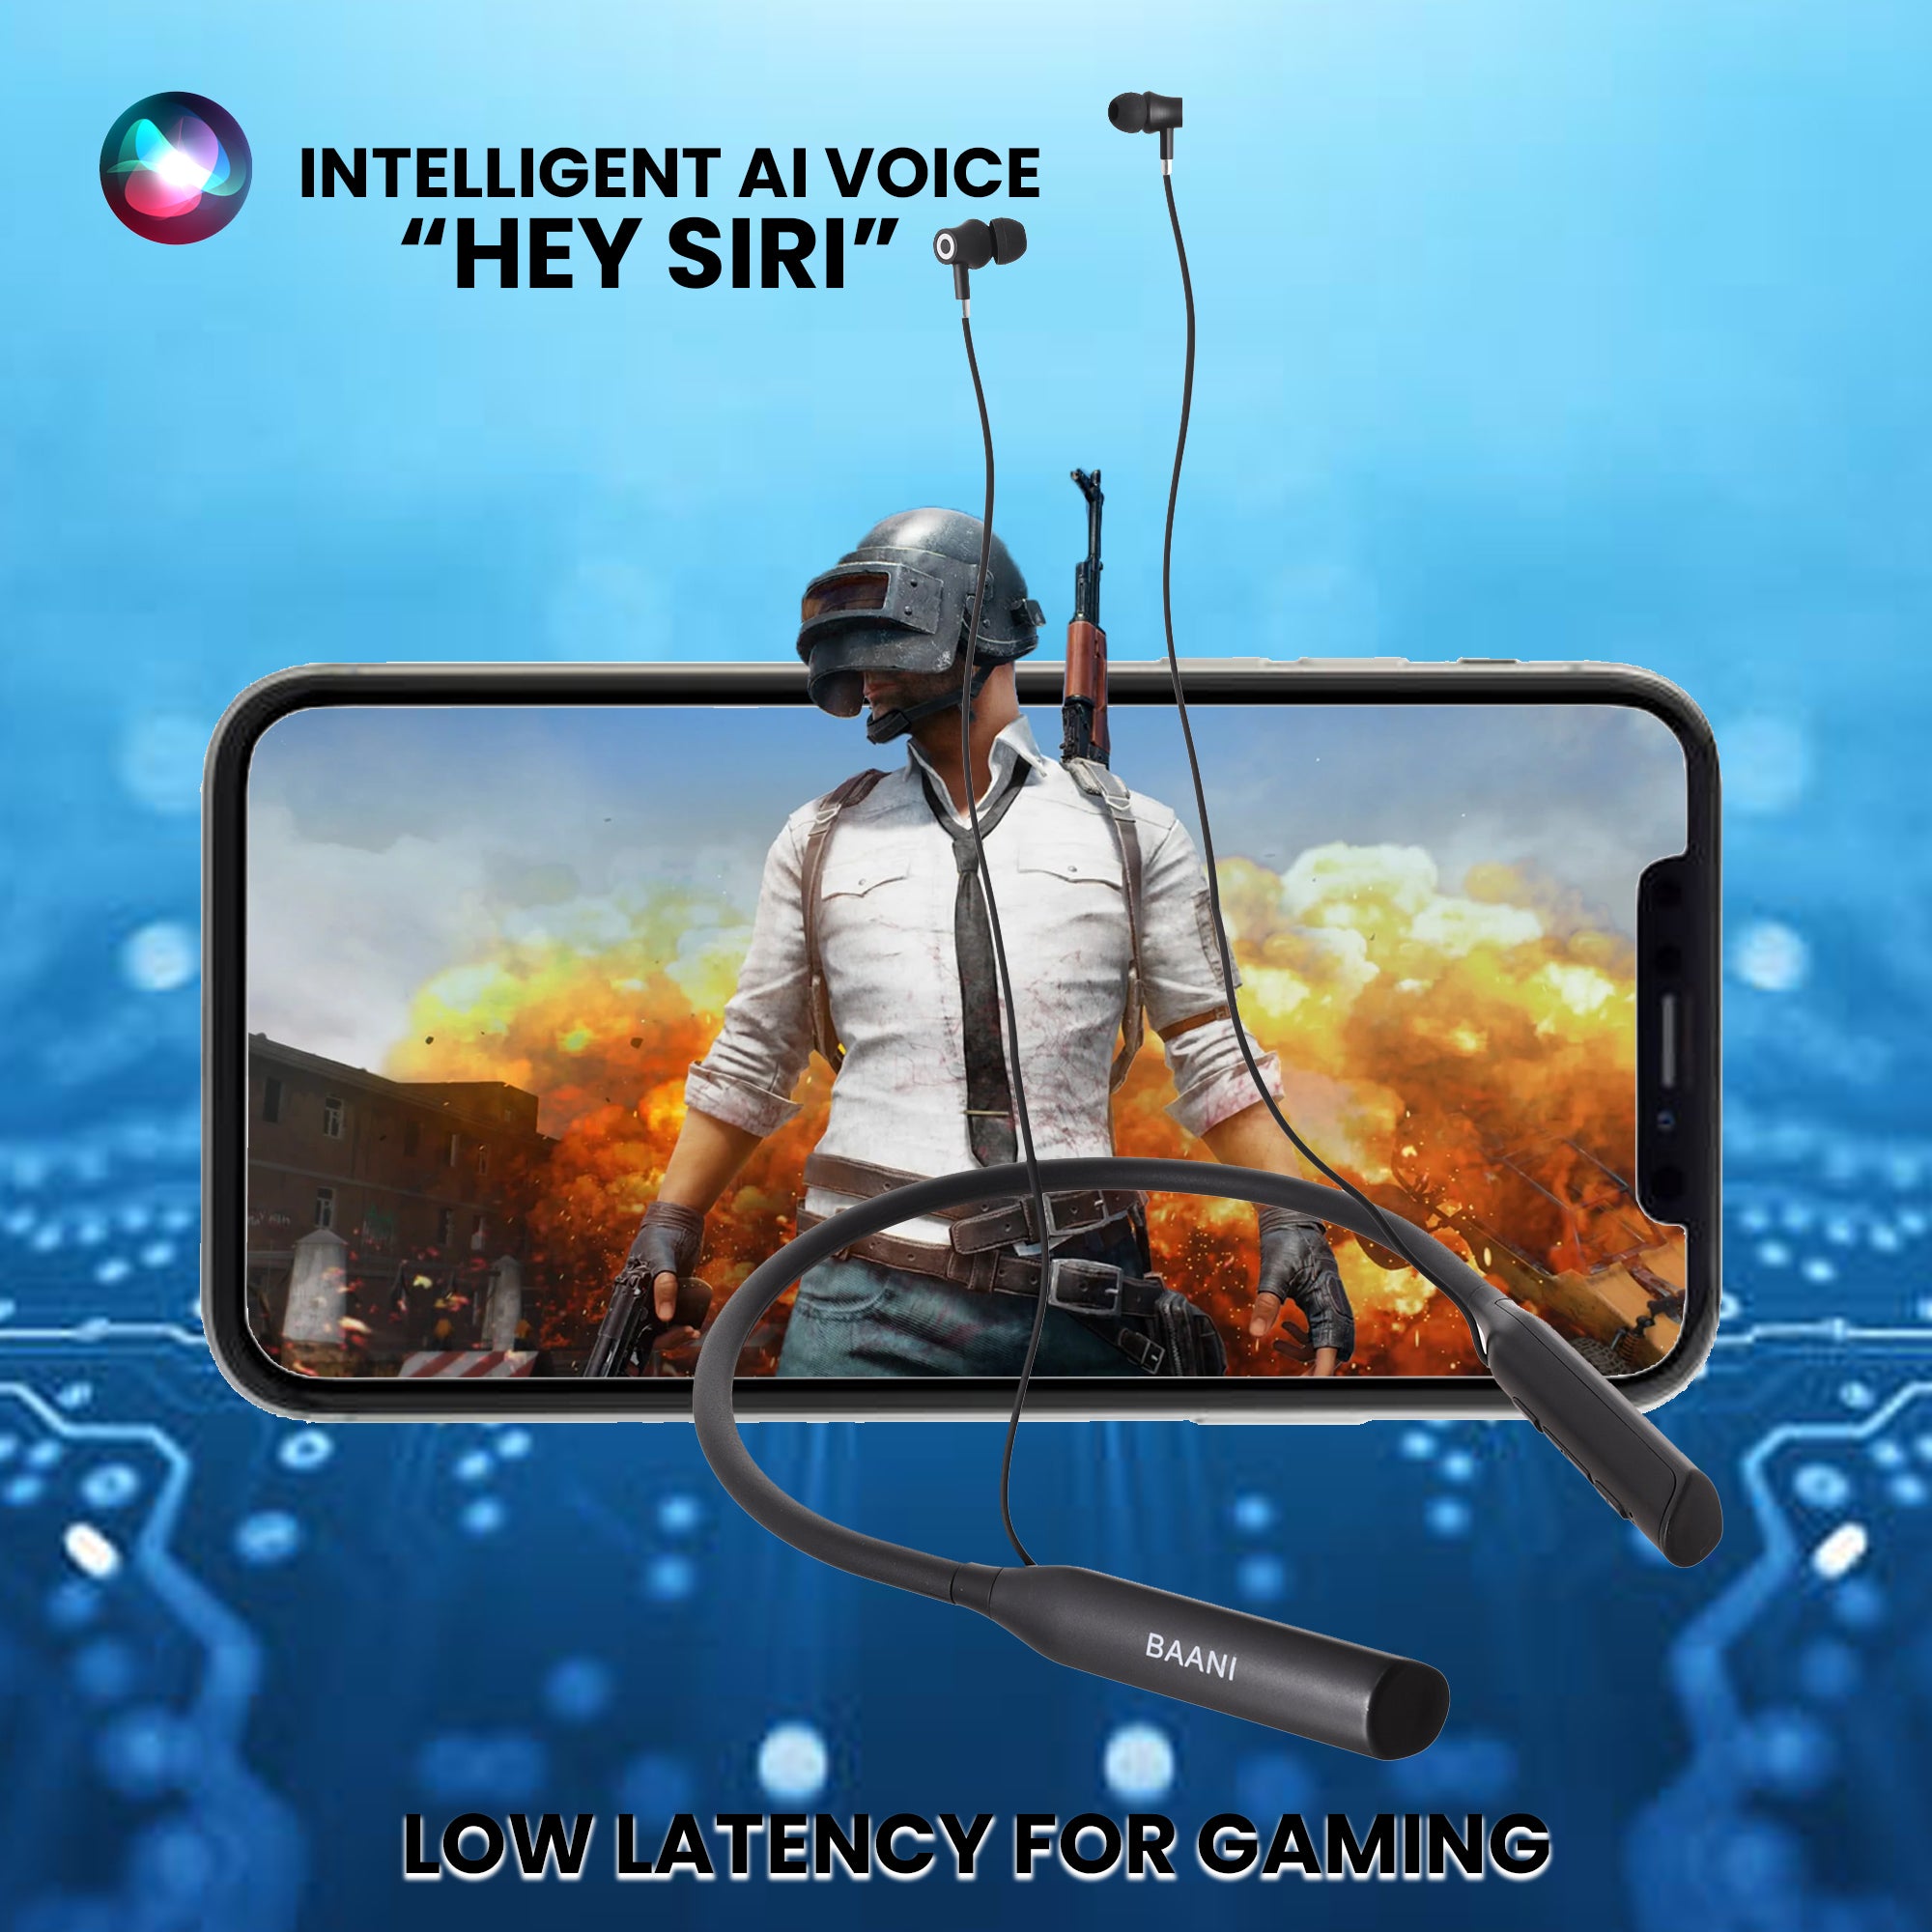 A smartphone is playing the game PUBG while connected to a black BN 206 Baani neckband.